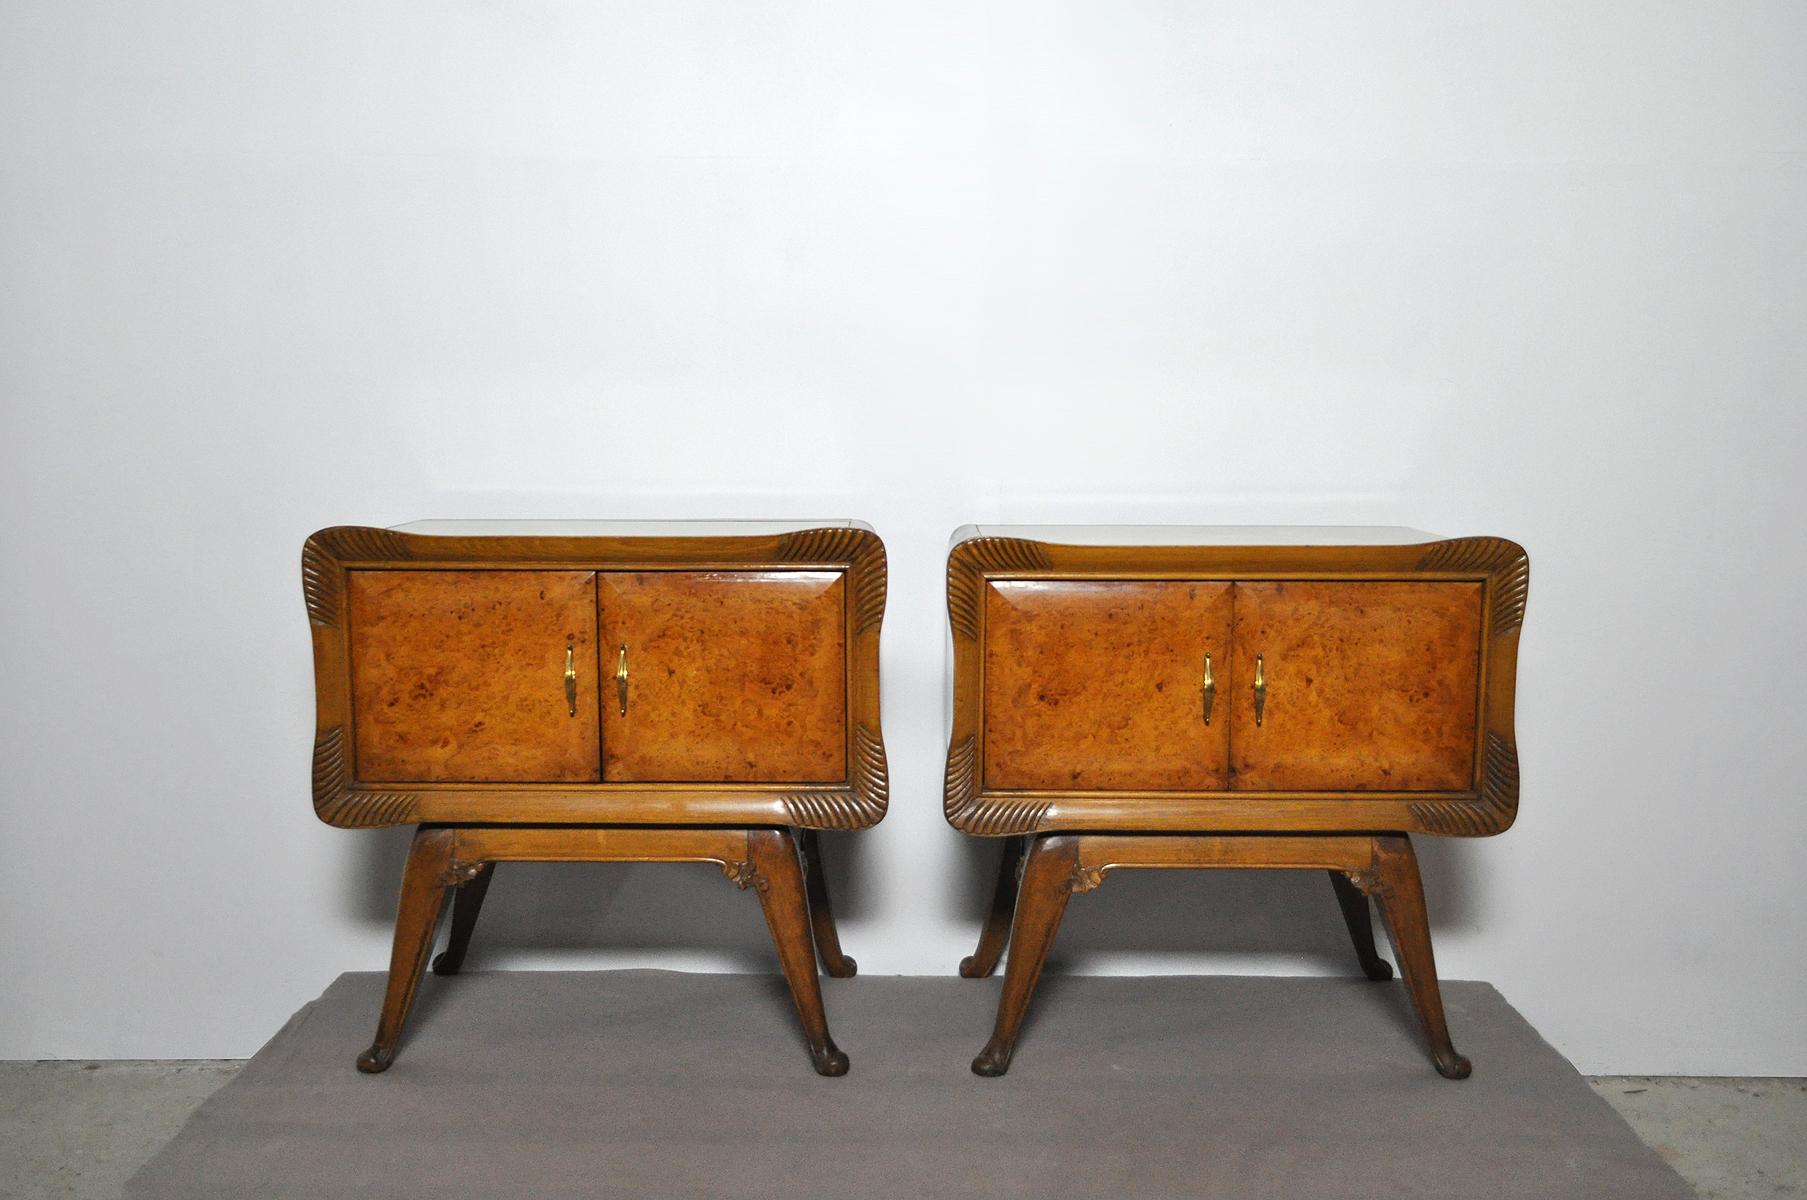 Italian Art Deco walnut and bird's-eye maple nightstands.
Bedside tables with brass handles and a marbled glass top.
Fine carved details on legs and front.

Excellent condition with a few related marks. No scratches on the glass.
A Chest of Drawers